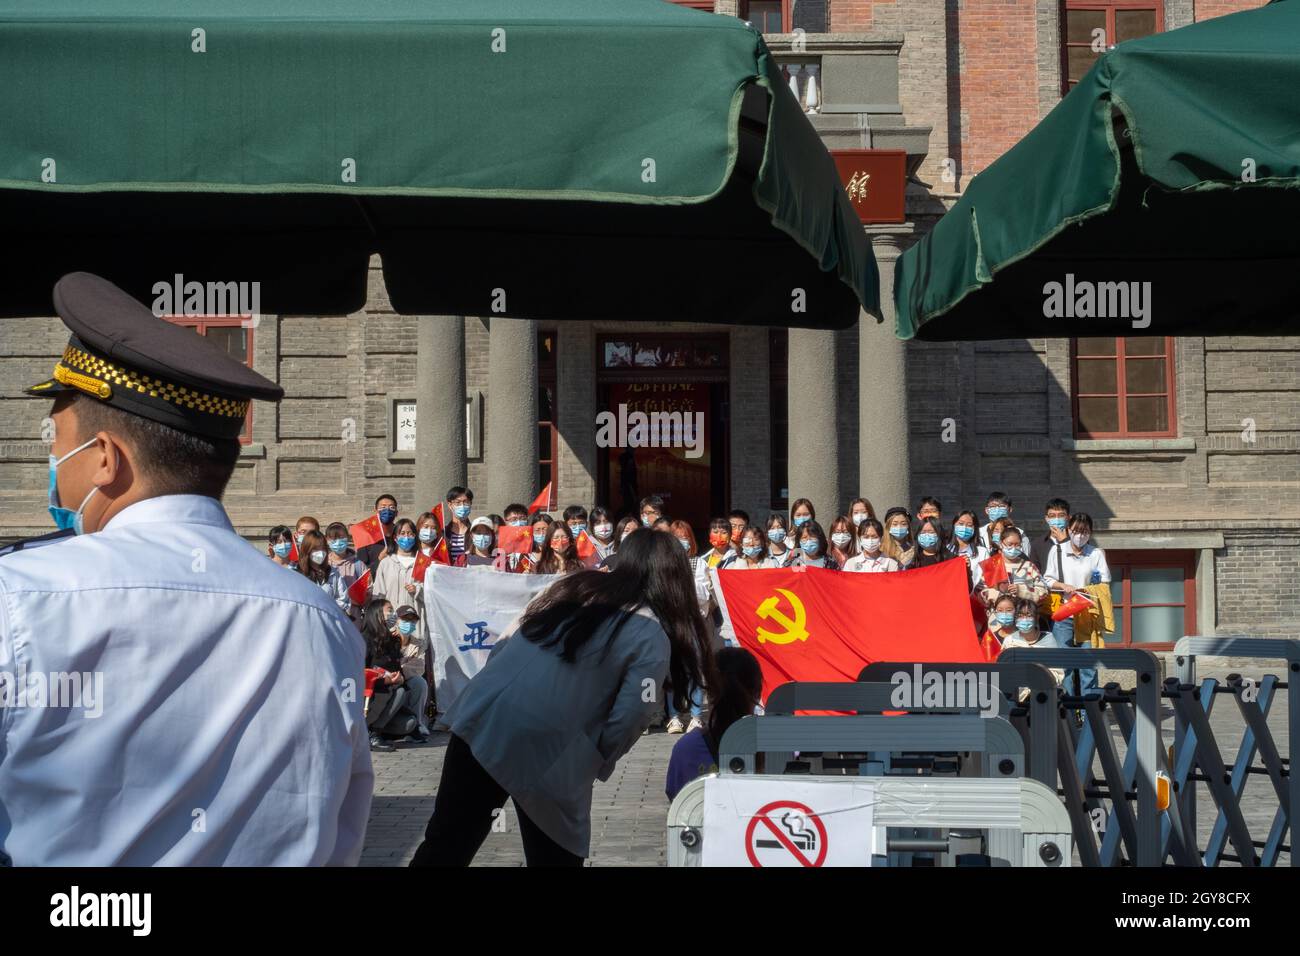 Chinese Communist Party members from a university have a group photo with a party flag in front of the historical Red Building of Peking University in Stock Photo